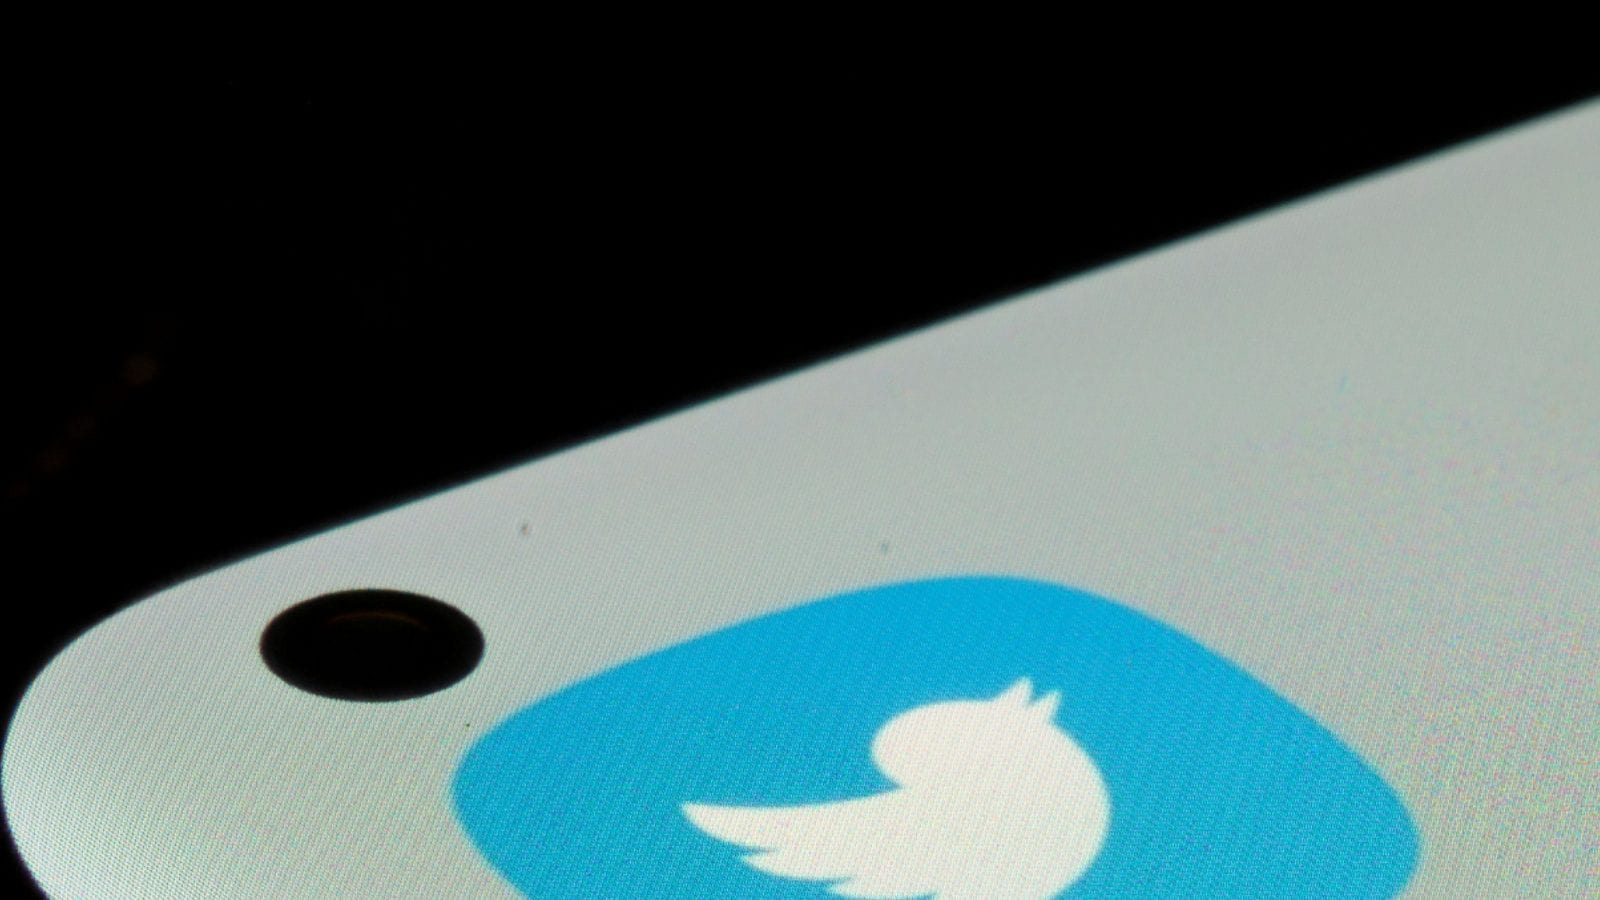 How To Save Twitter Videos On Your iOS Or Android Phone: Step-by-Step Guide